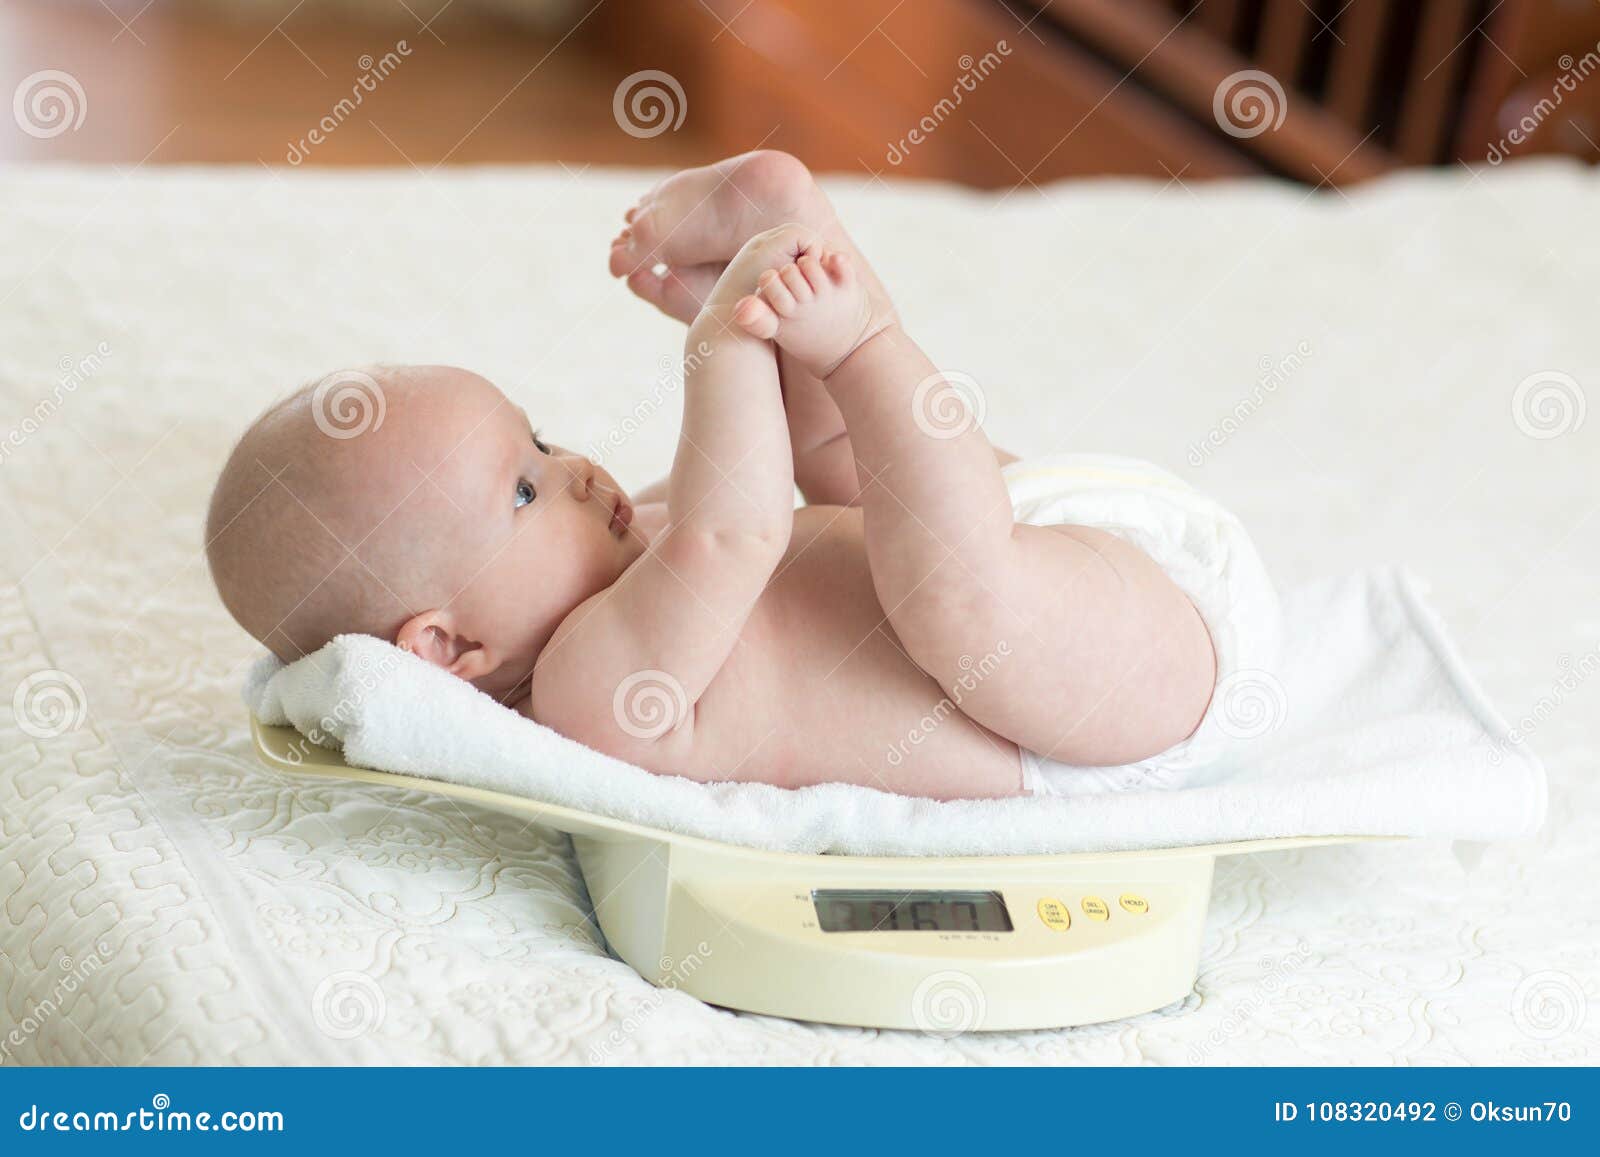 https://thumbs.dreamstime.com/z/newborn-baby-weighing-scale-child-indoors-108320492.jpg